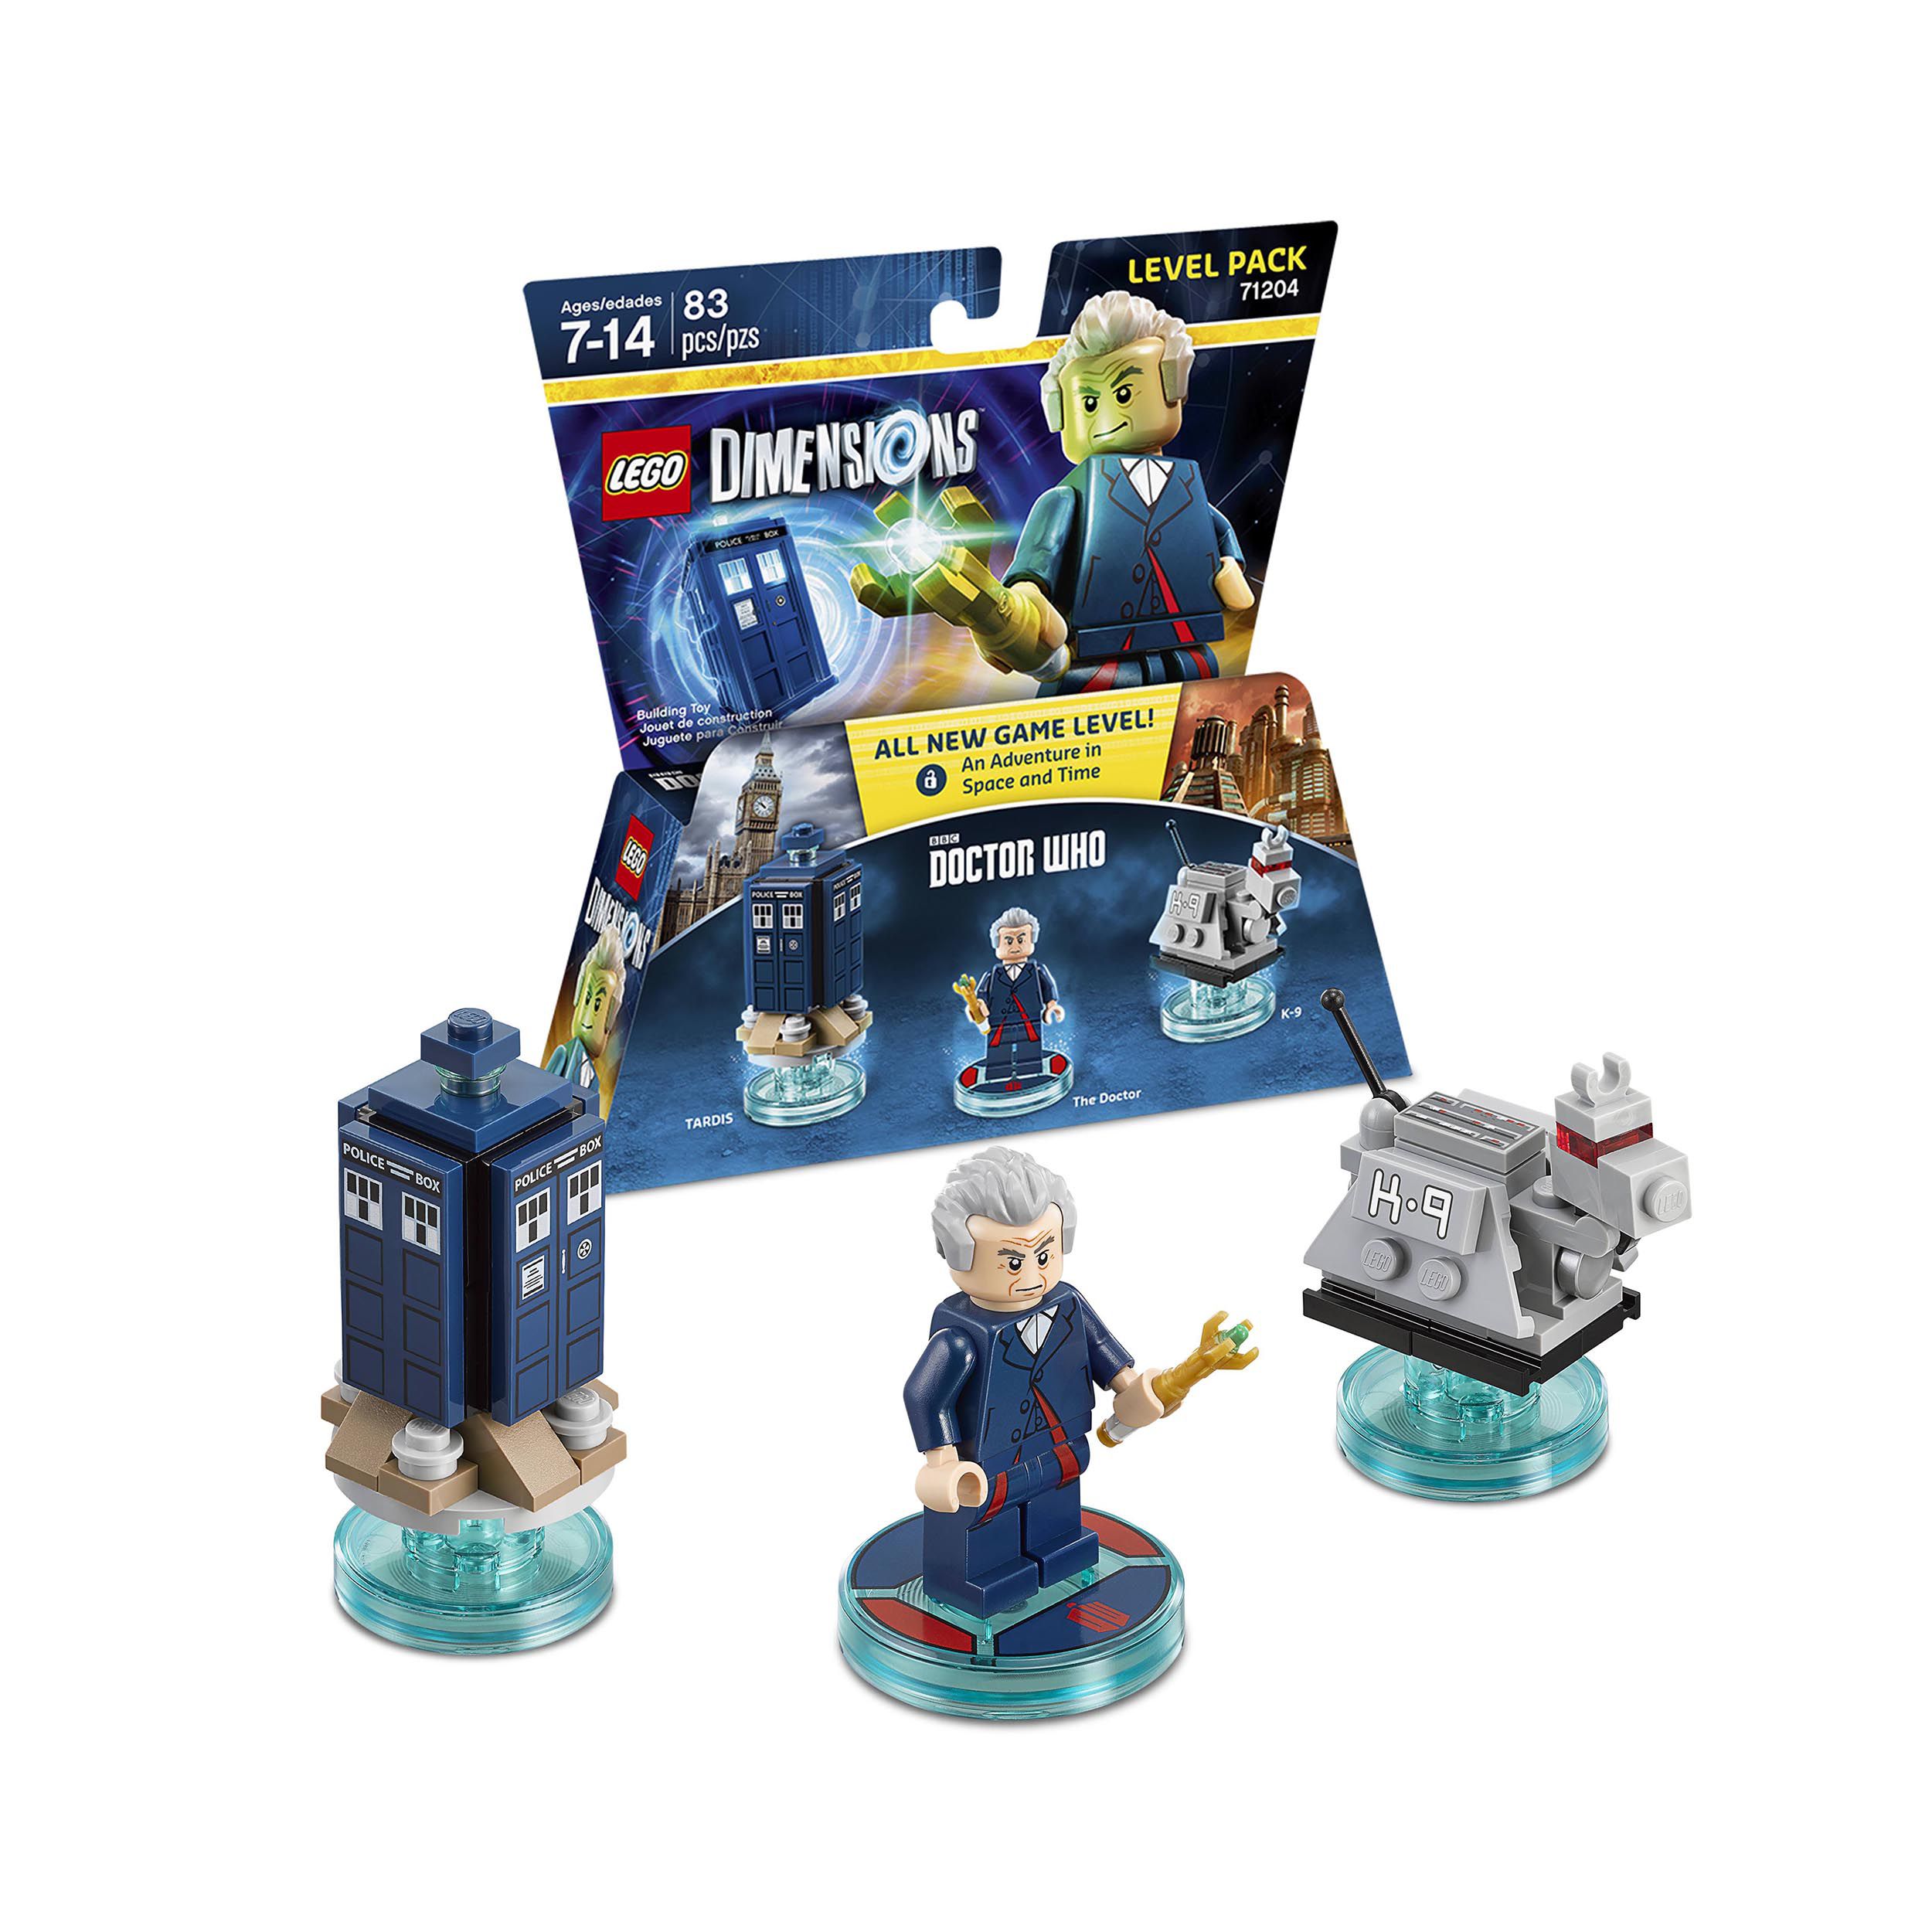 Doctor Who Level Pack - Lego Dimensions - Game Games - Loja de